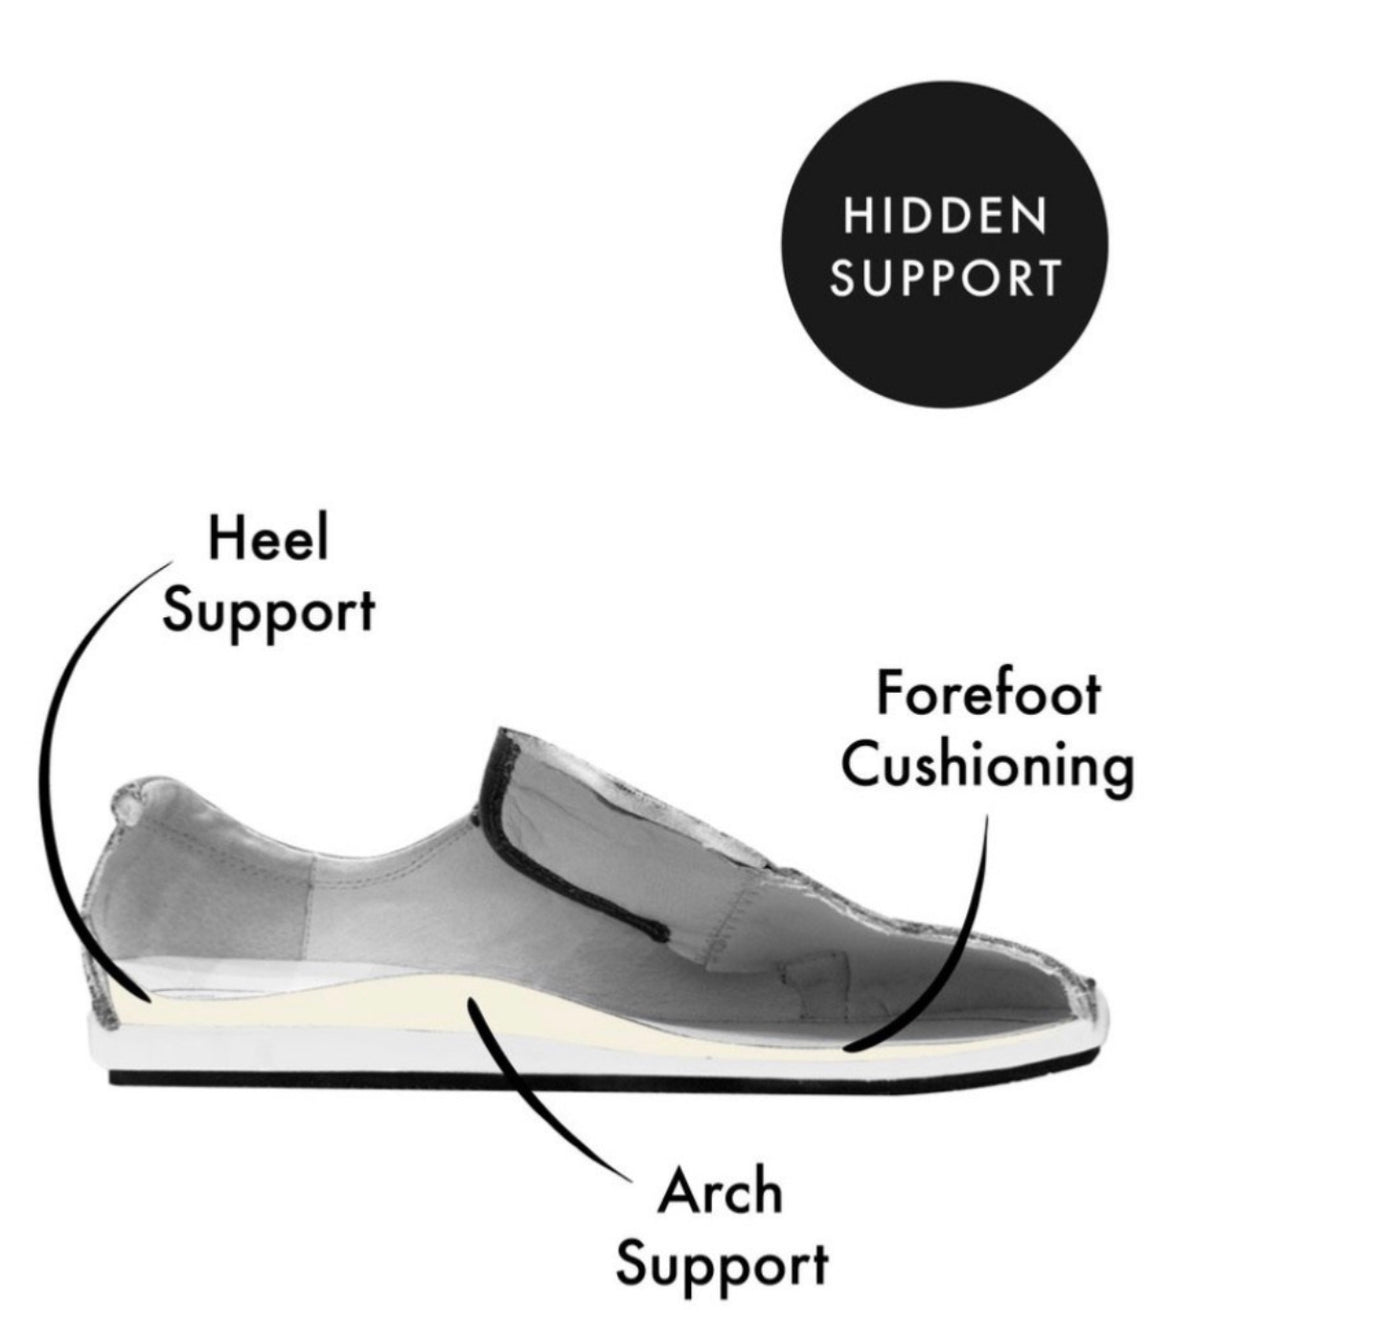 Heel Support Arch Support Forefoot Cushioning Image